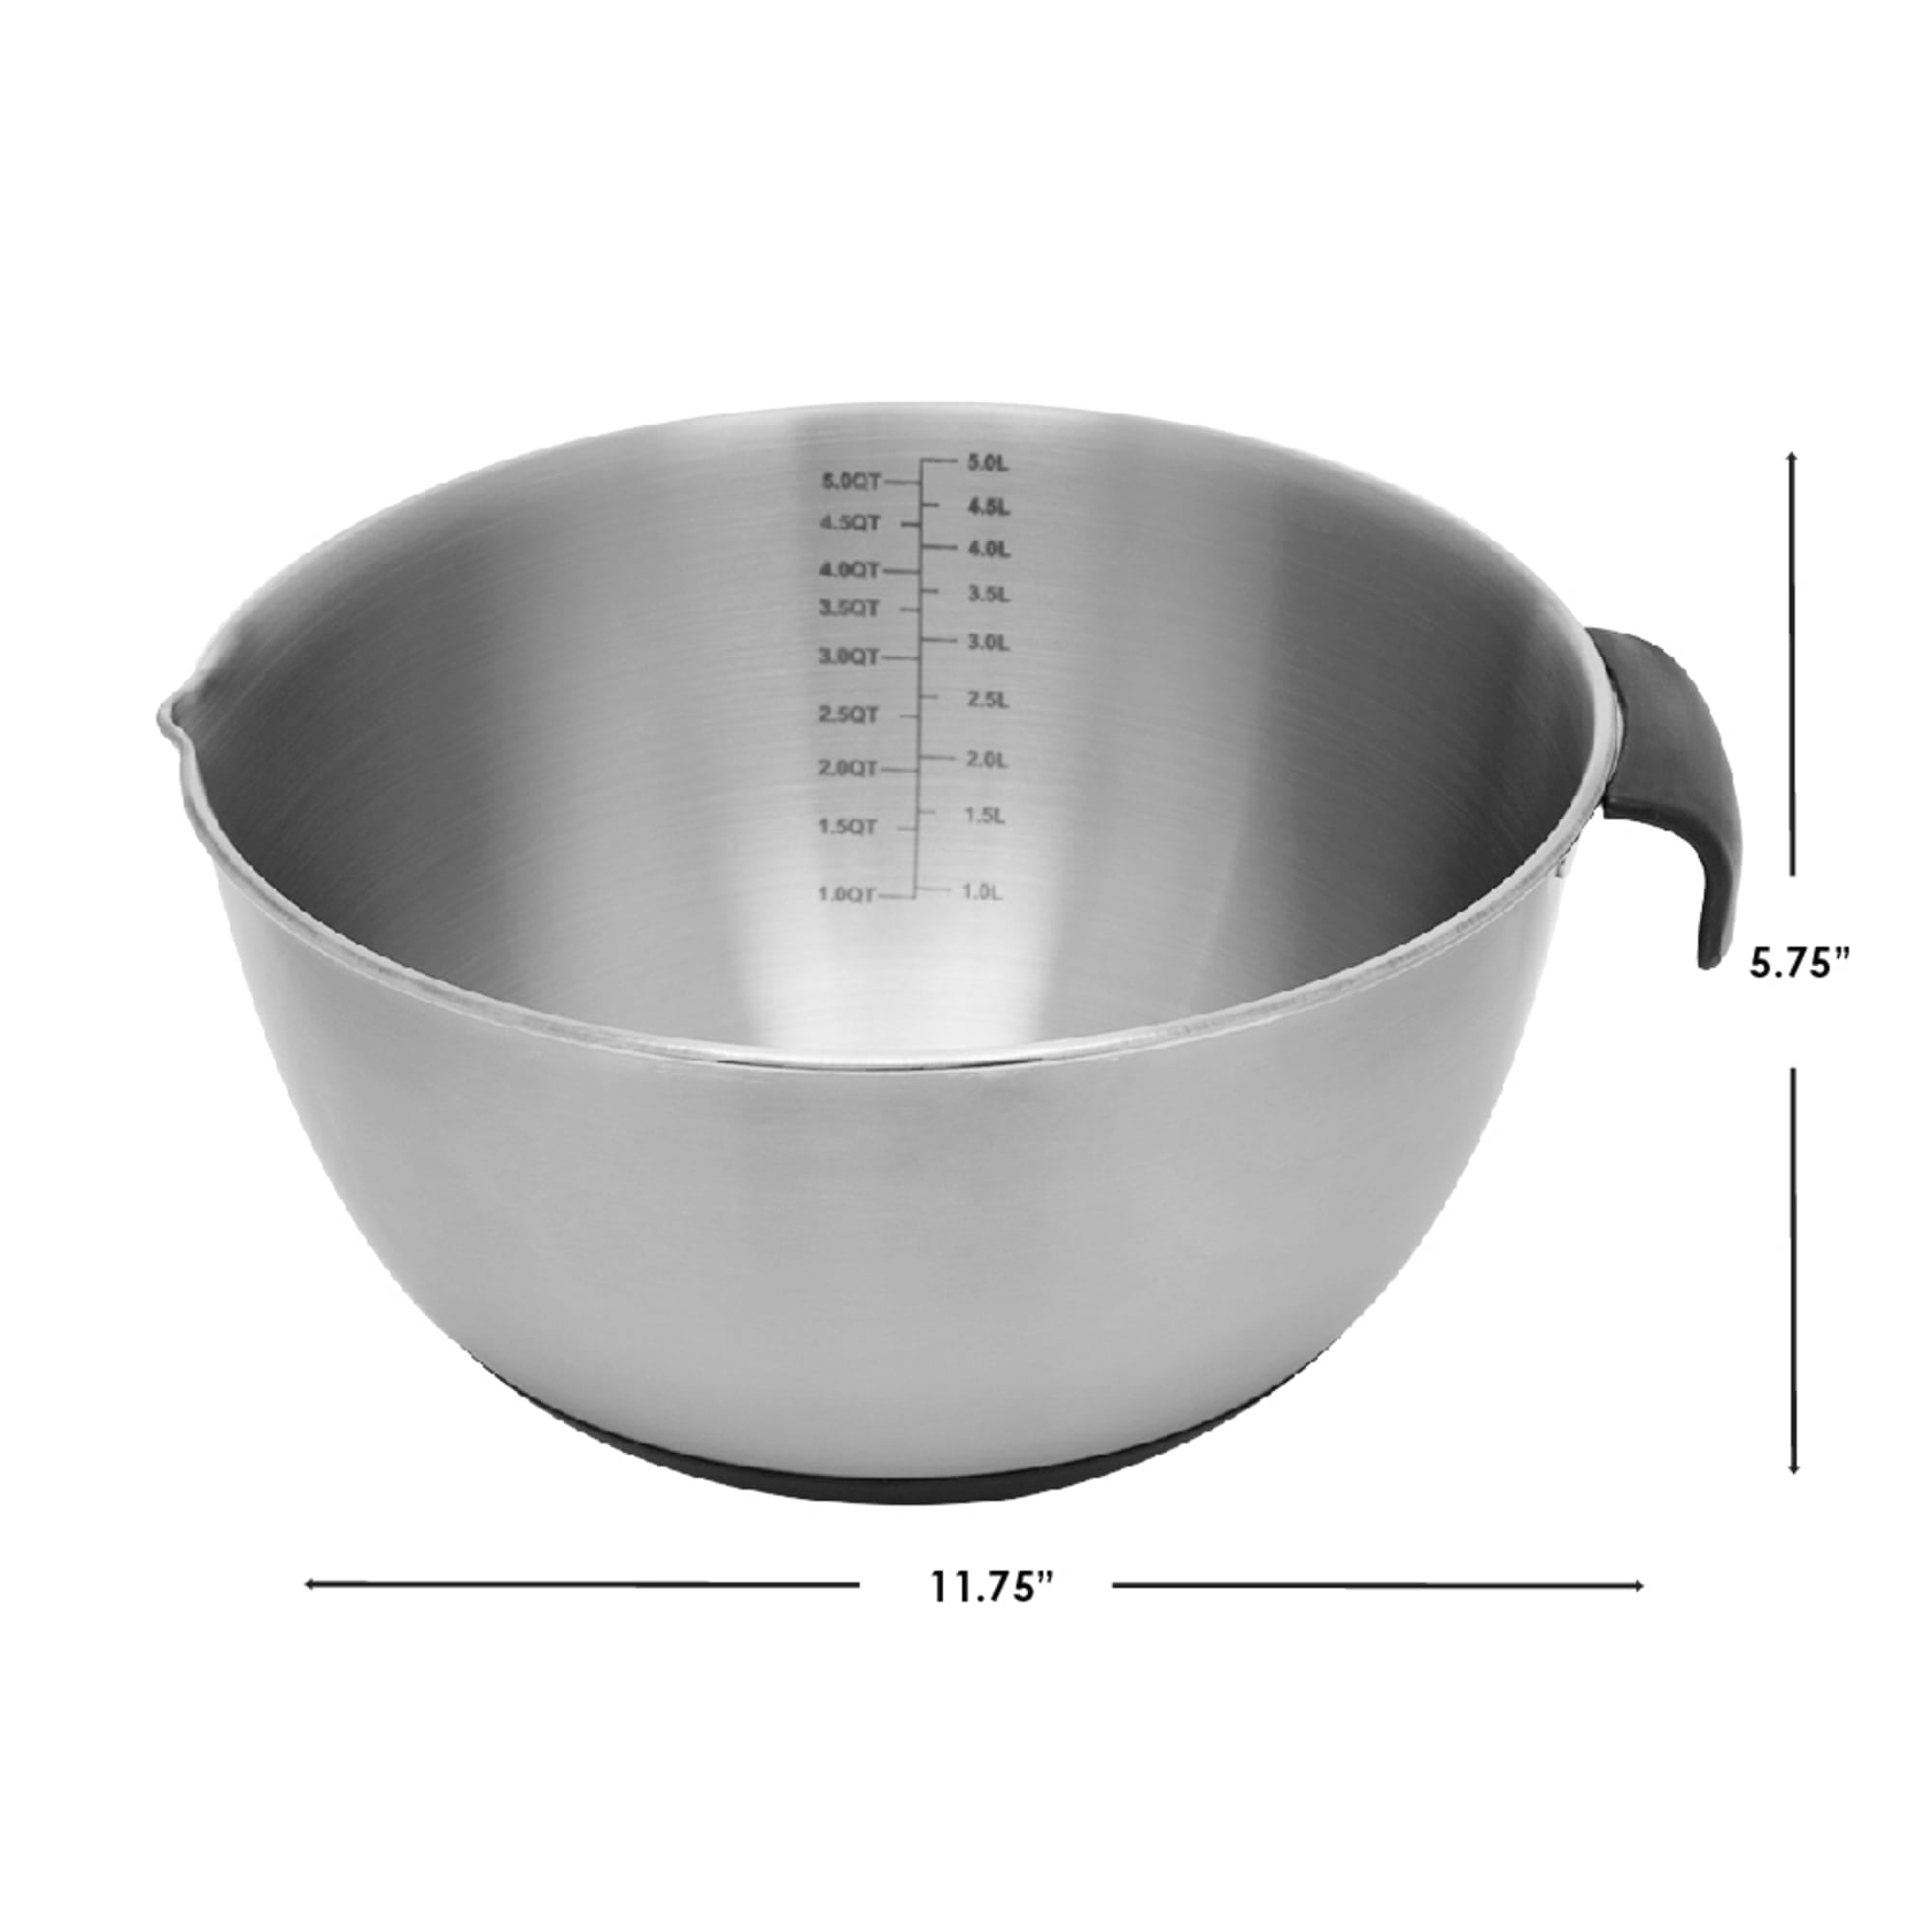 Home Basics 5 Qt. Stainless Steel Mixing Bowl with Measurements, Non-Skid Bottom, Handle and Pour Spout $6.00 EACH, CASE PACK OF 12